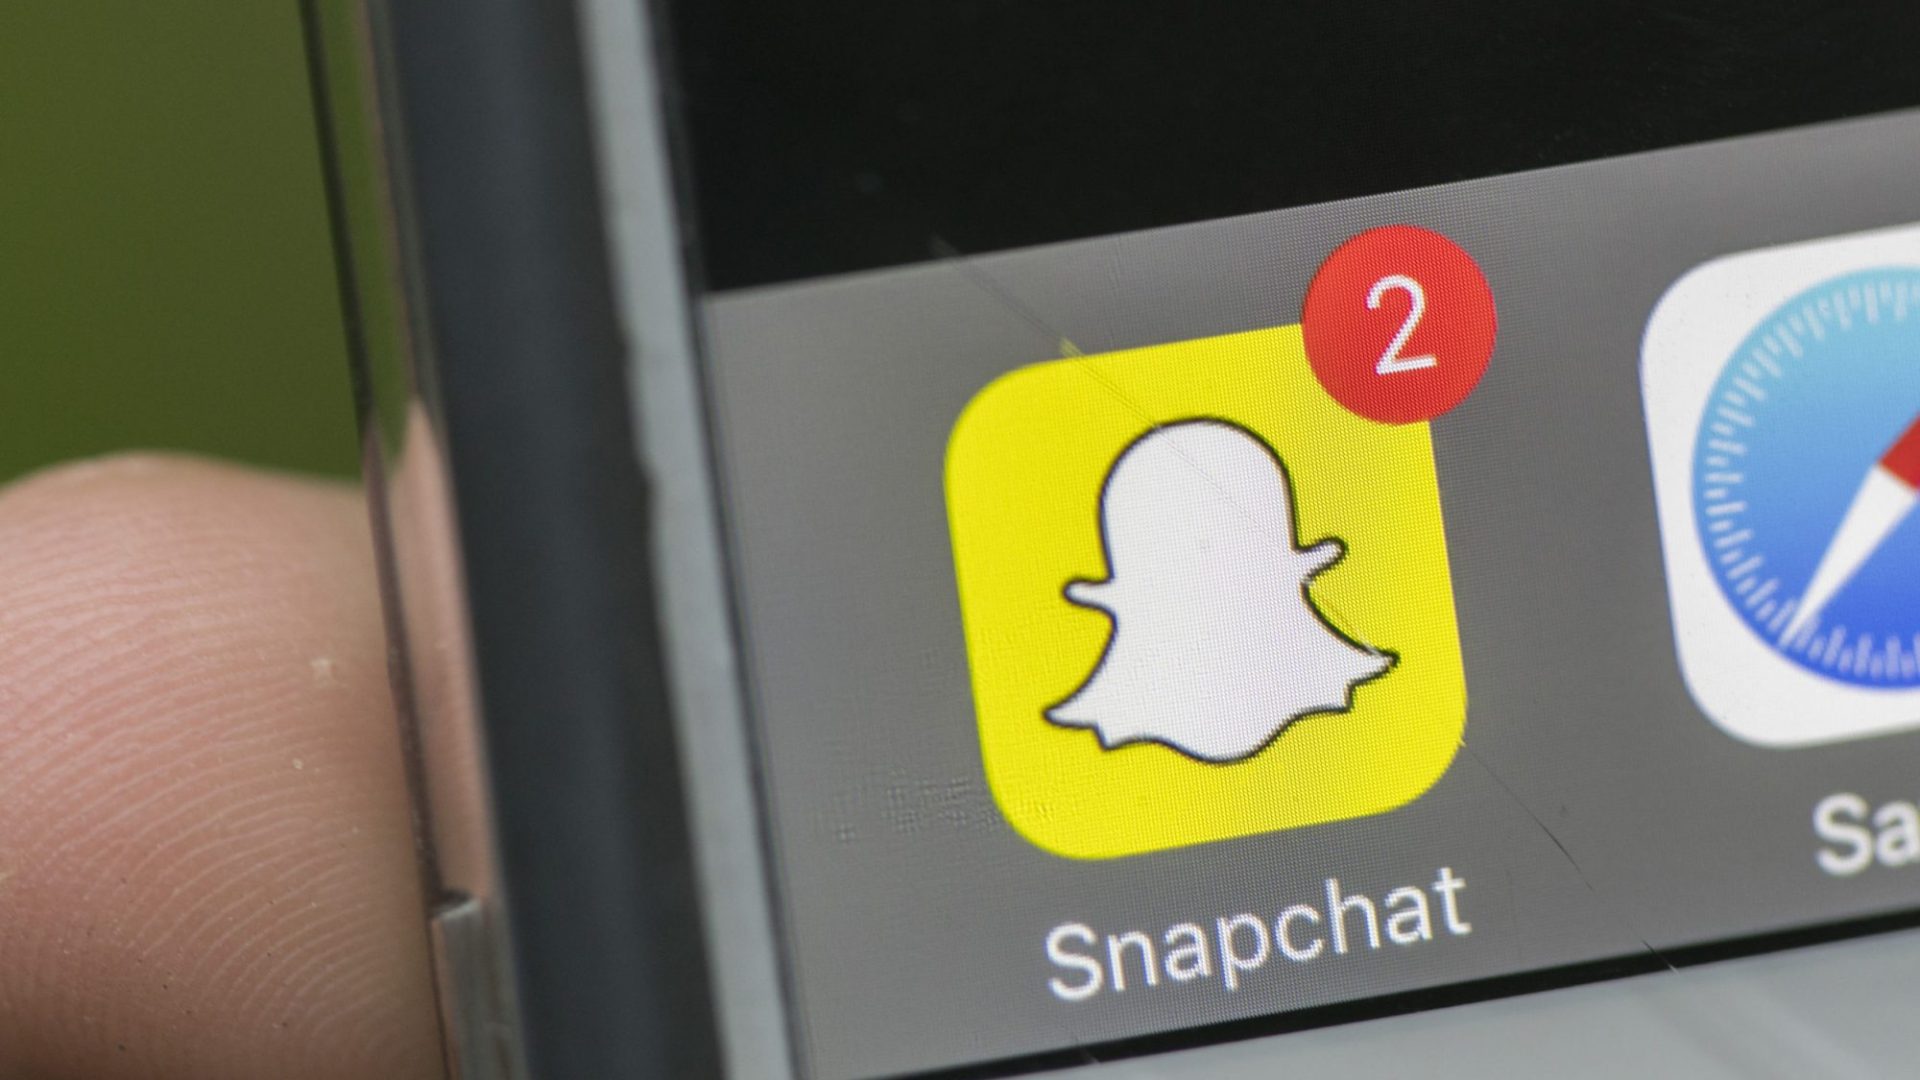 Why you don't have the new Snapchat update everyone is upset